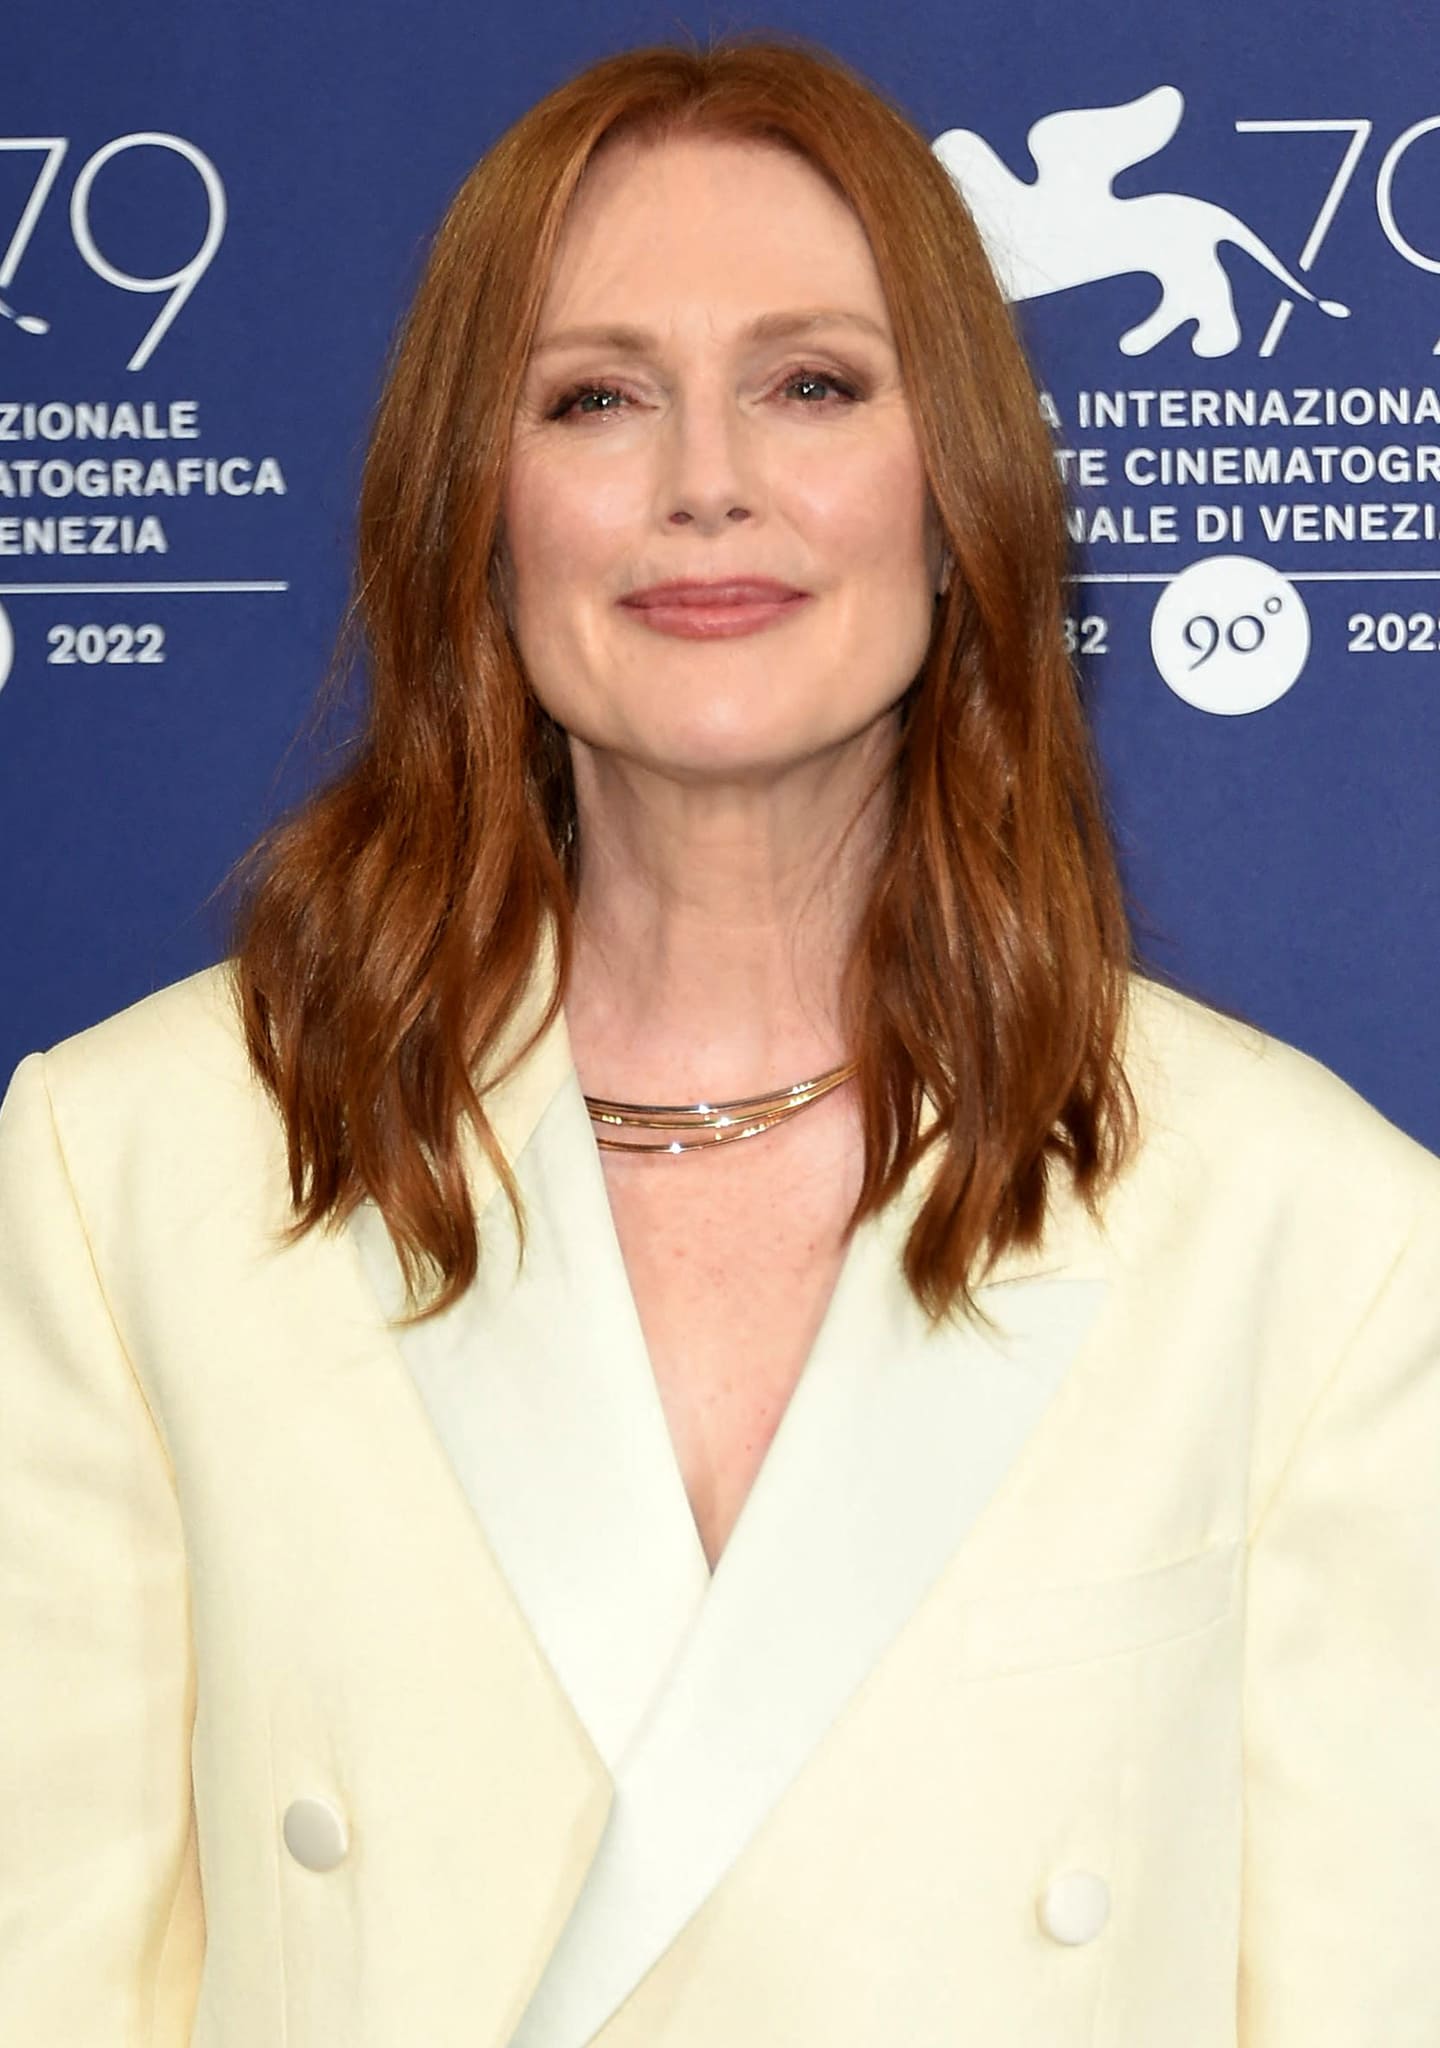 Julianne Moore glams up with Cartier jewelry, soft pink makeup, and wavy hairstyle